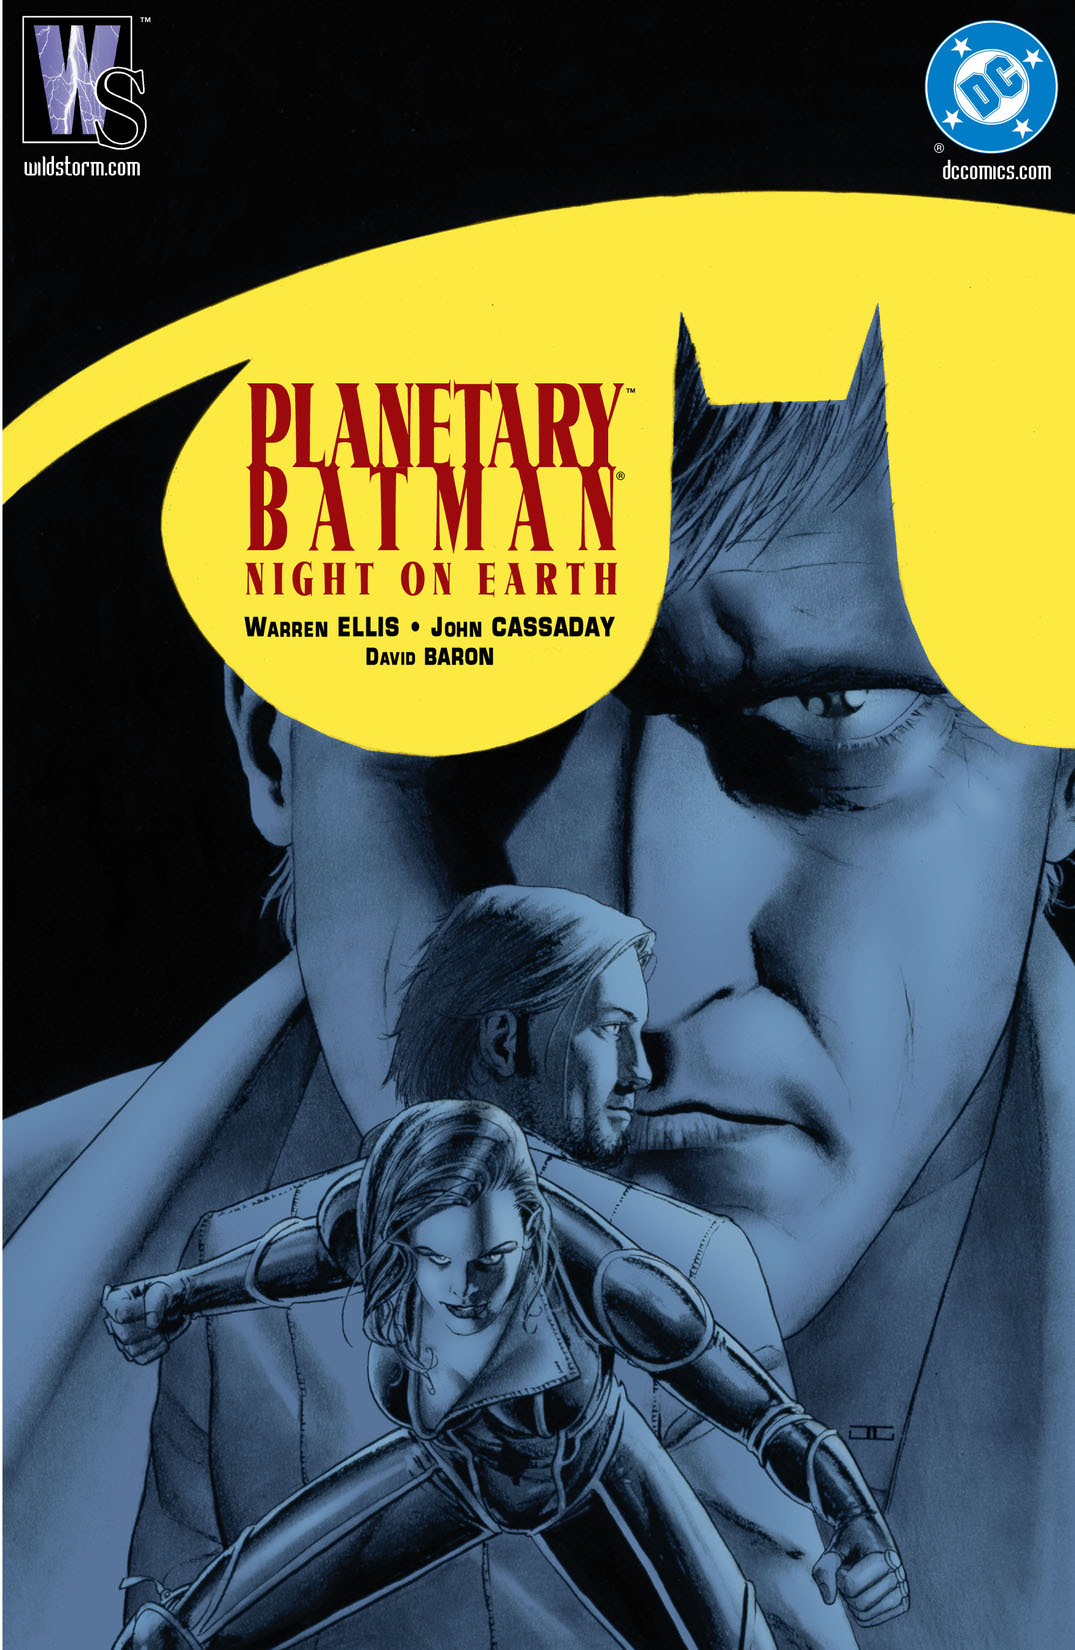 Planetary/Batman #1 preview images